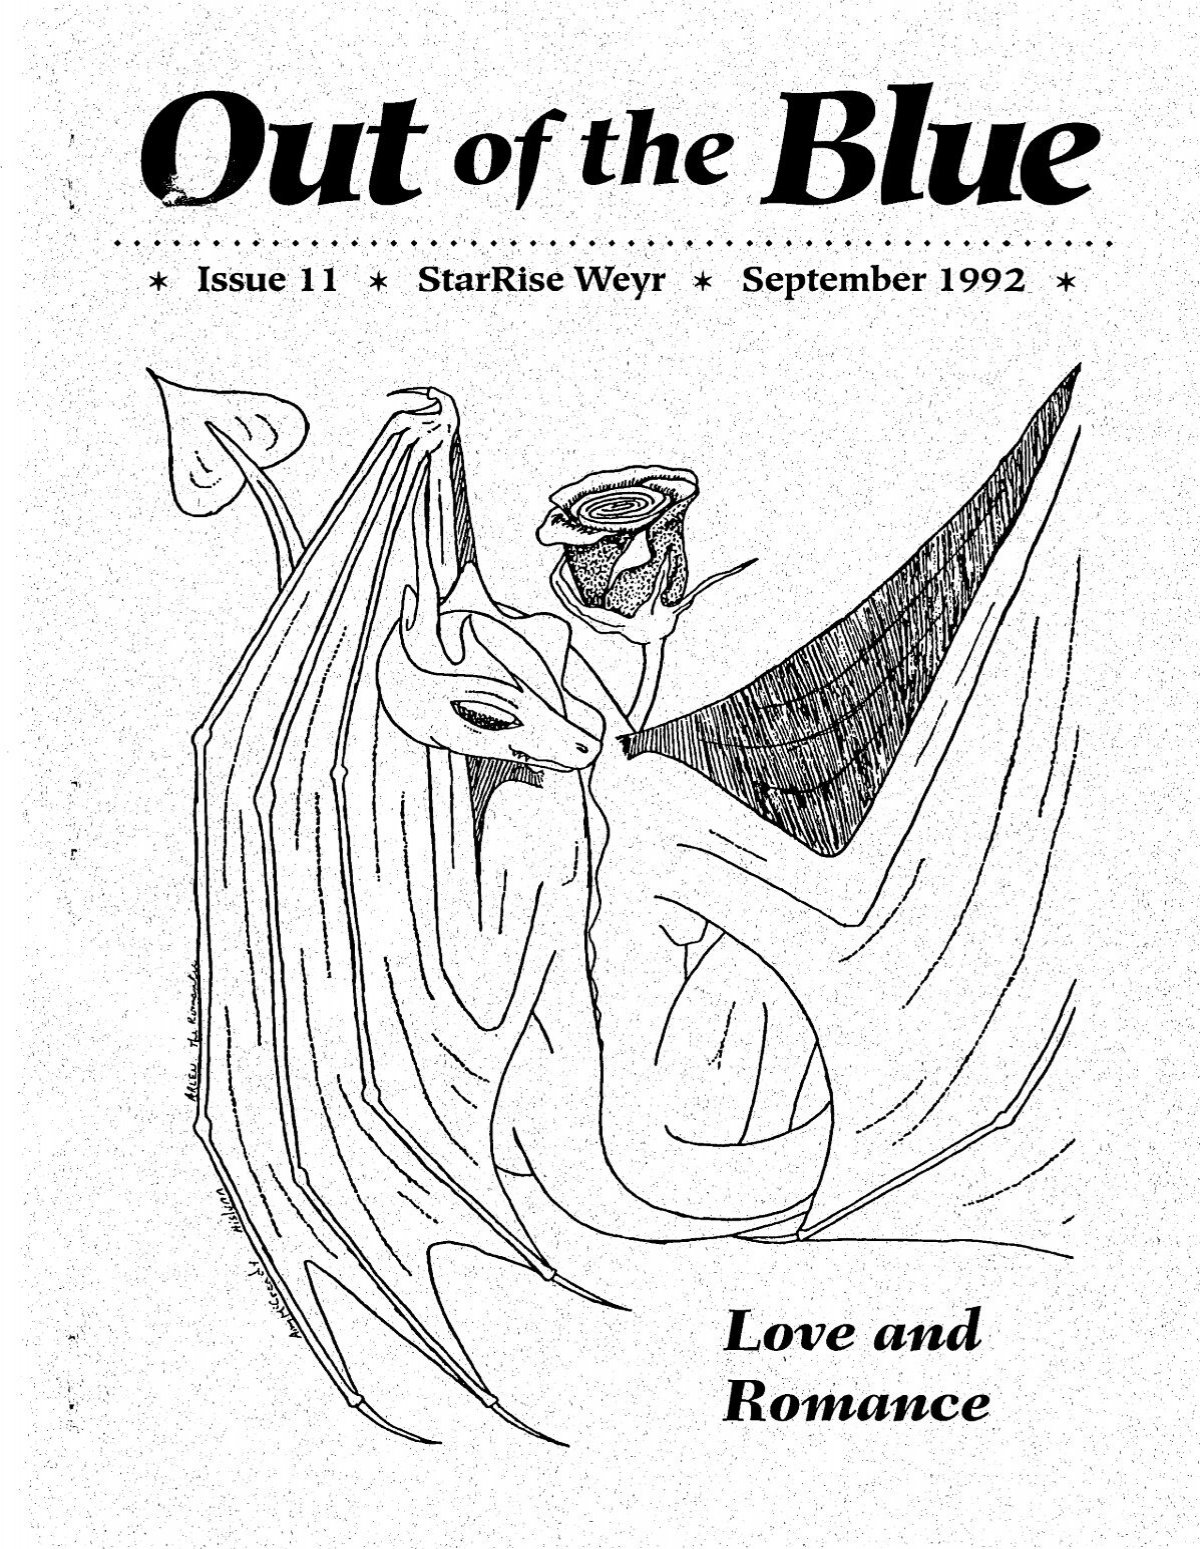 Out of the Blue, Issue 11, September 1992 - StarRise Weyr